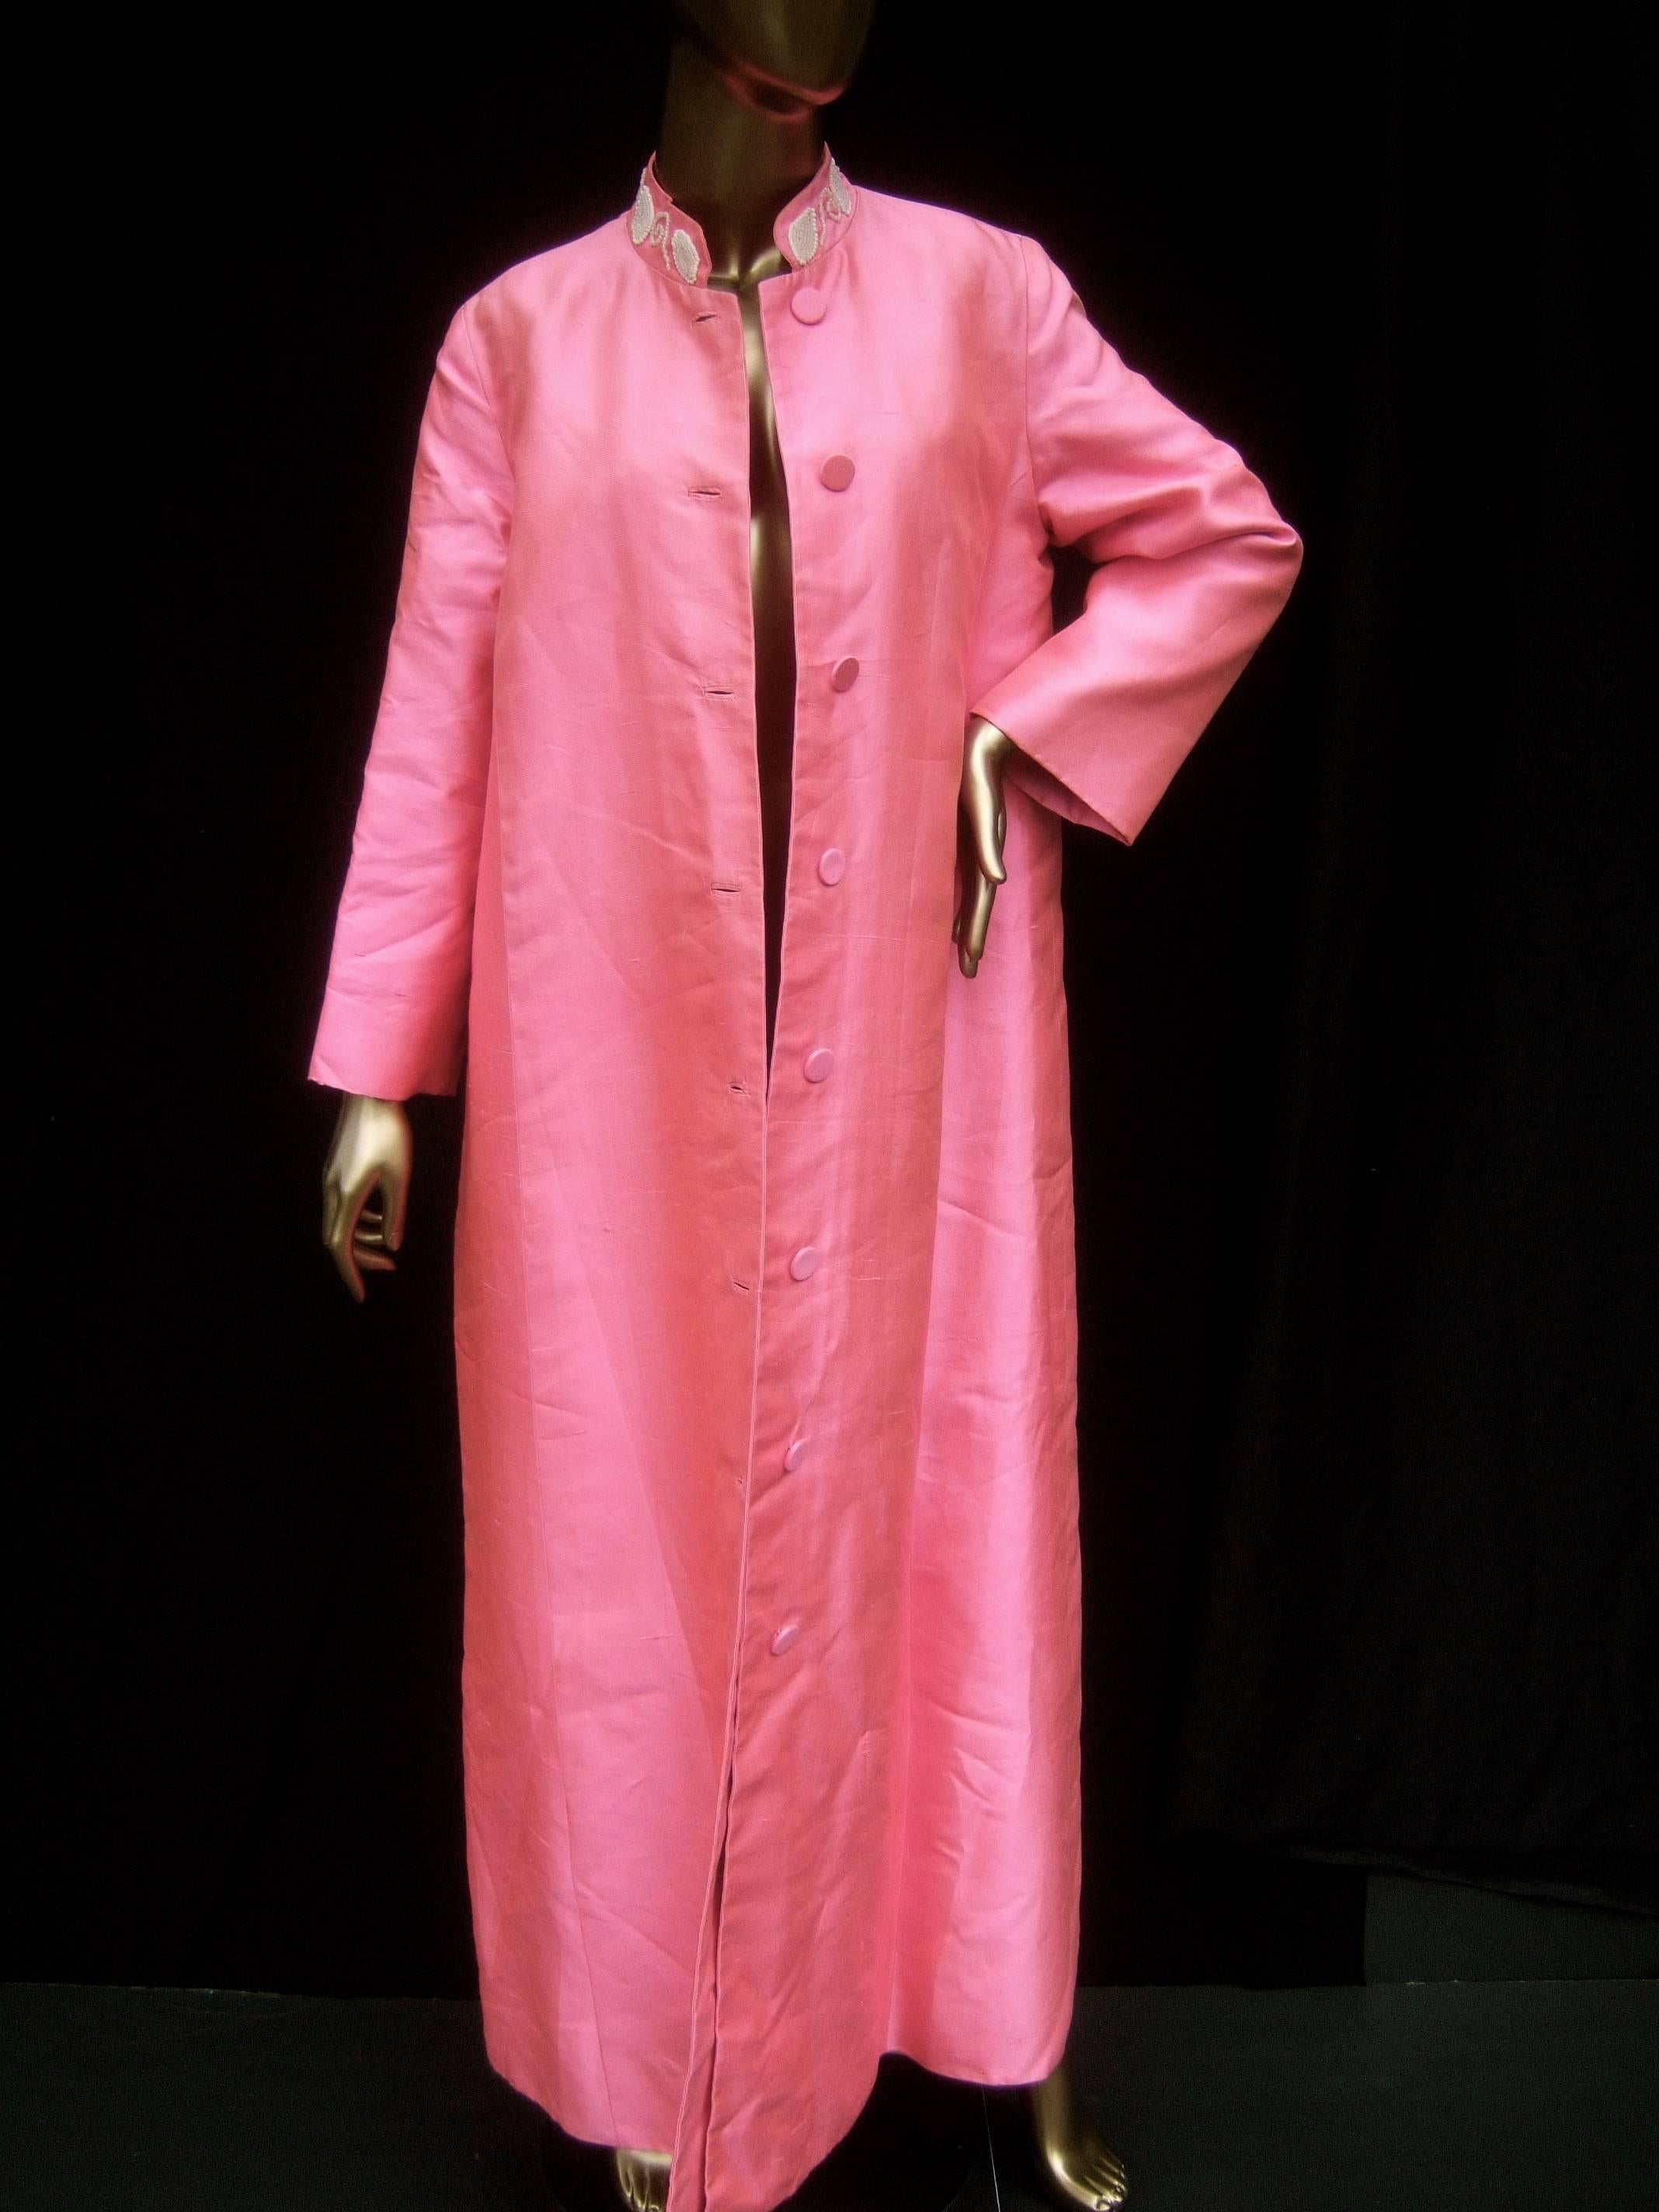 1960s Opulent pink silk shantung opera coat 
The elegant long coat is designed with luminous
bright pink silk shantung fabric

The row of buttons that run down the front are
covered with the same pink silk fabric

The Nehru style stand up collar is